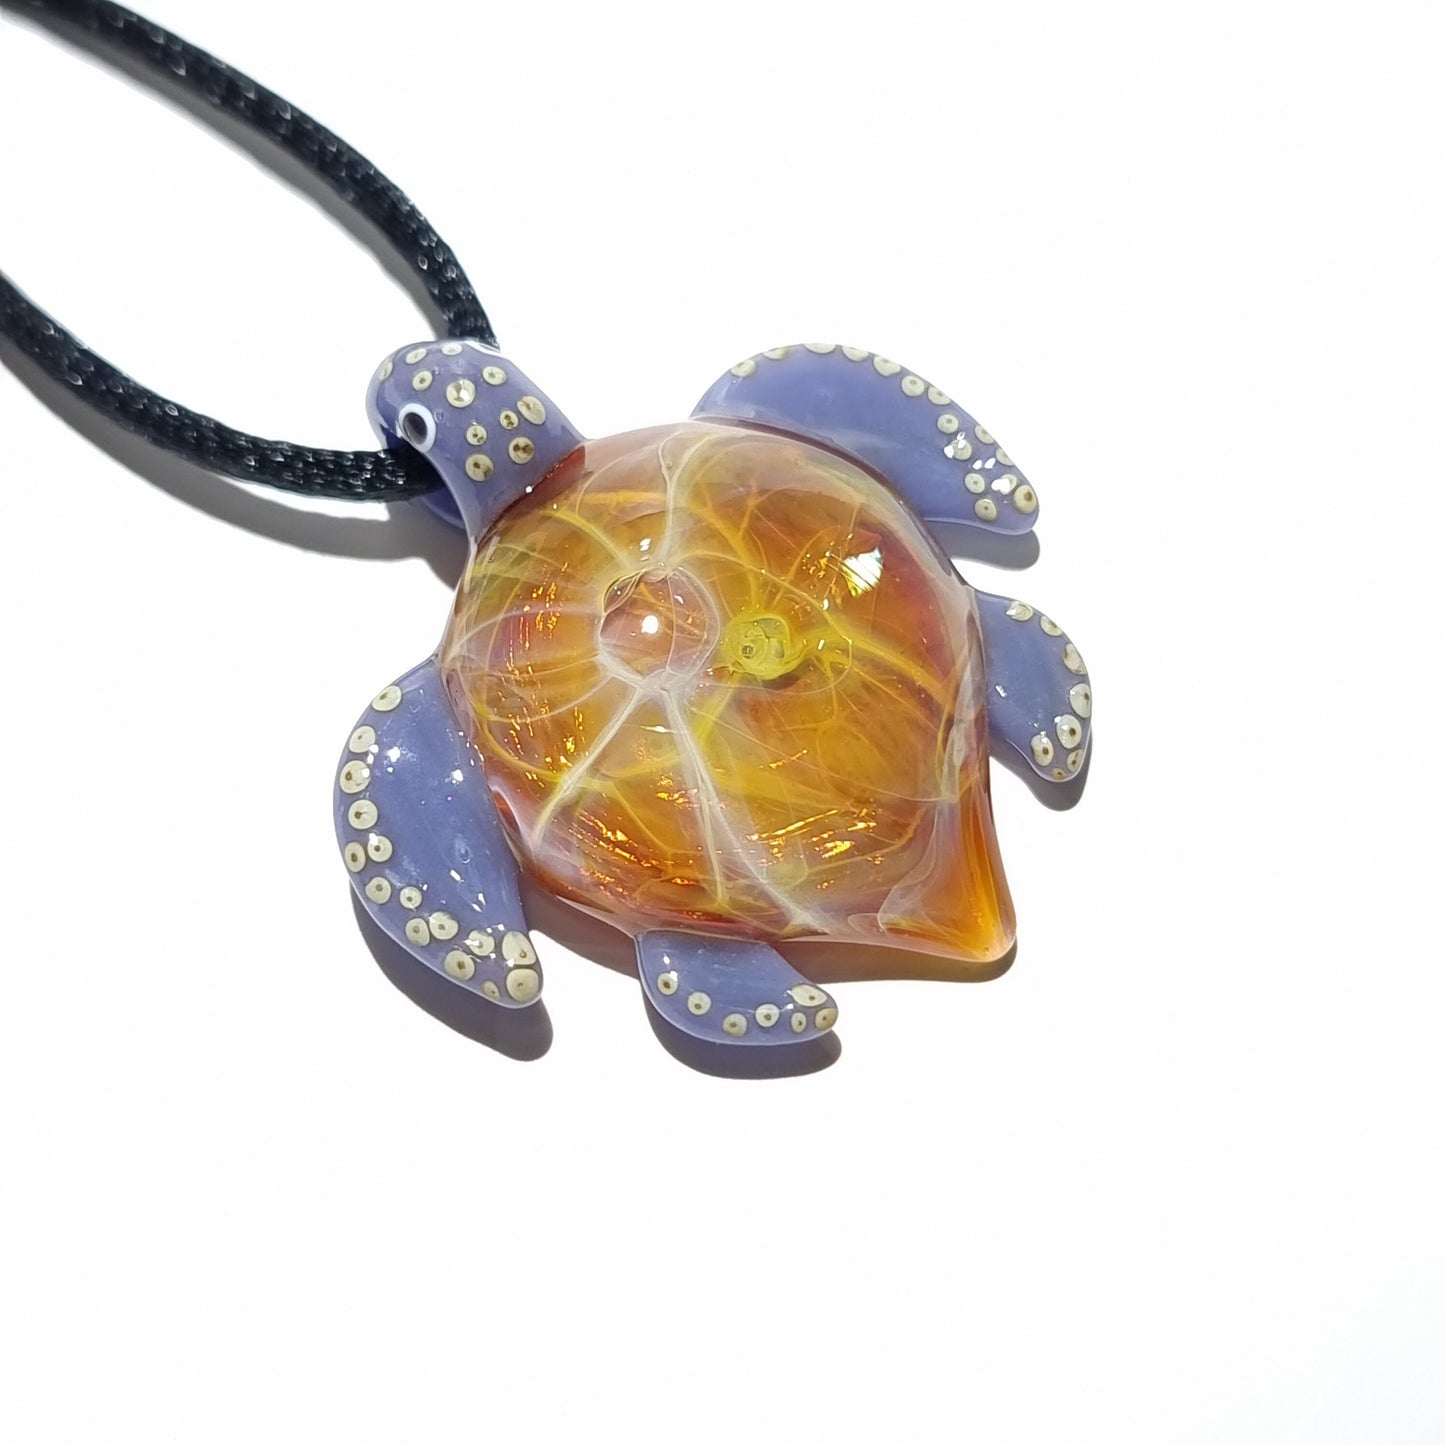 Glass Pendant - Sunset Gem Turtle - Sea Glass Jewelry - Glass Art - Turtle - Blown Glass - Artist Signed - Details of Pure Silver